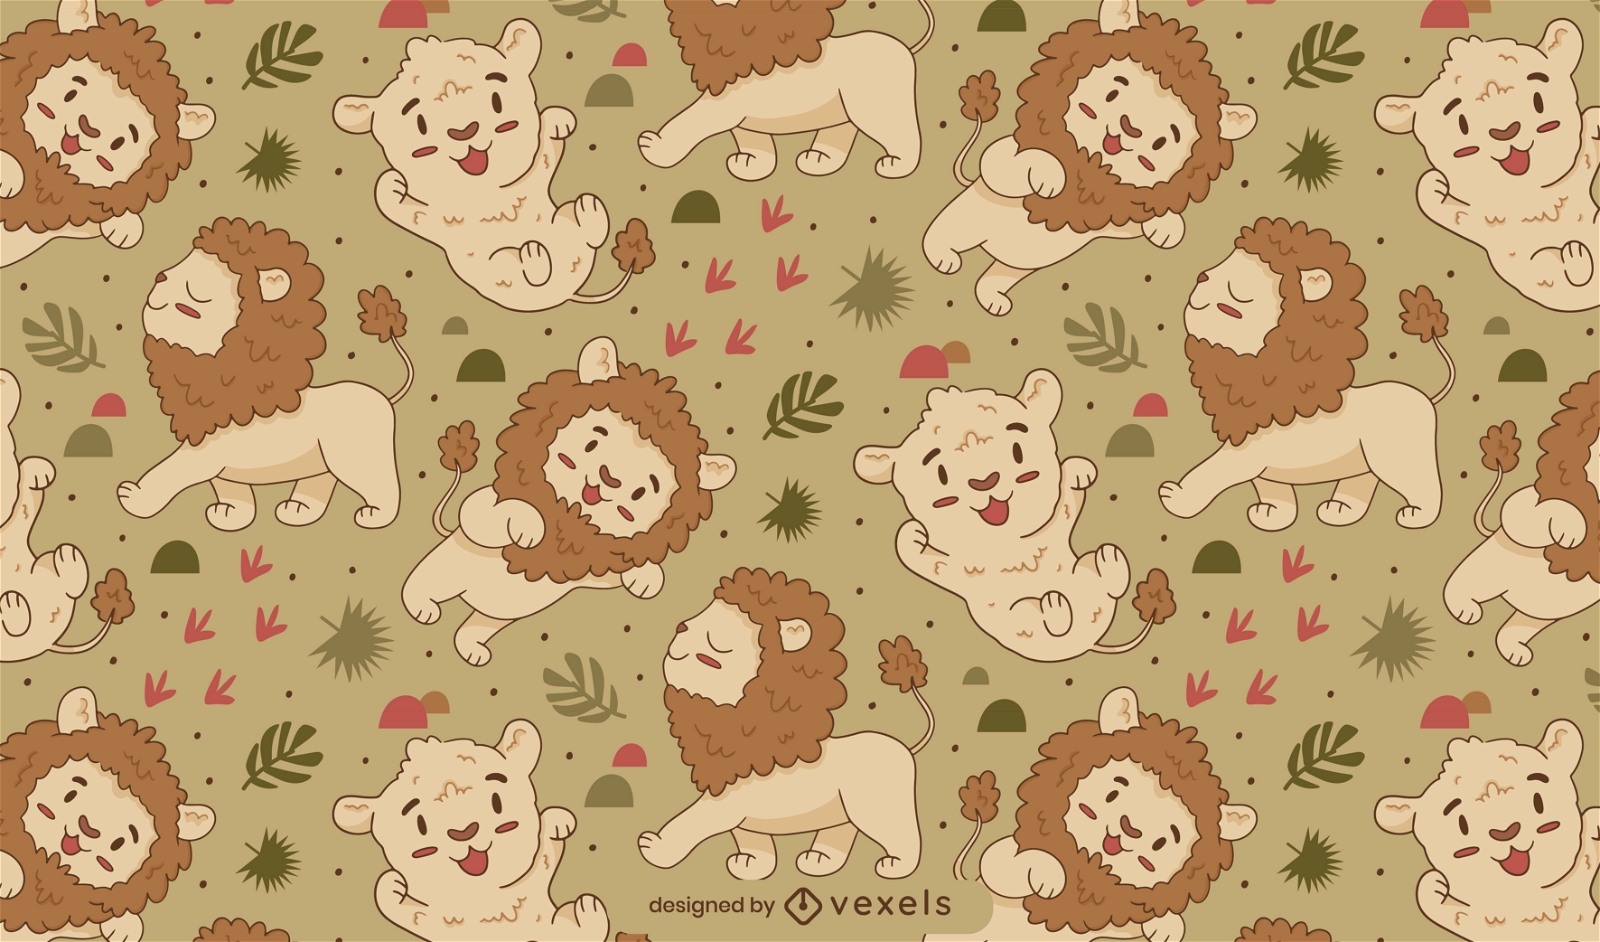 Adorable baby lions and tigers pattern design